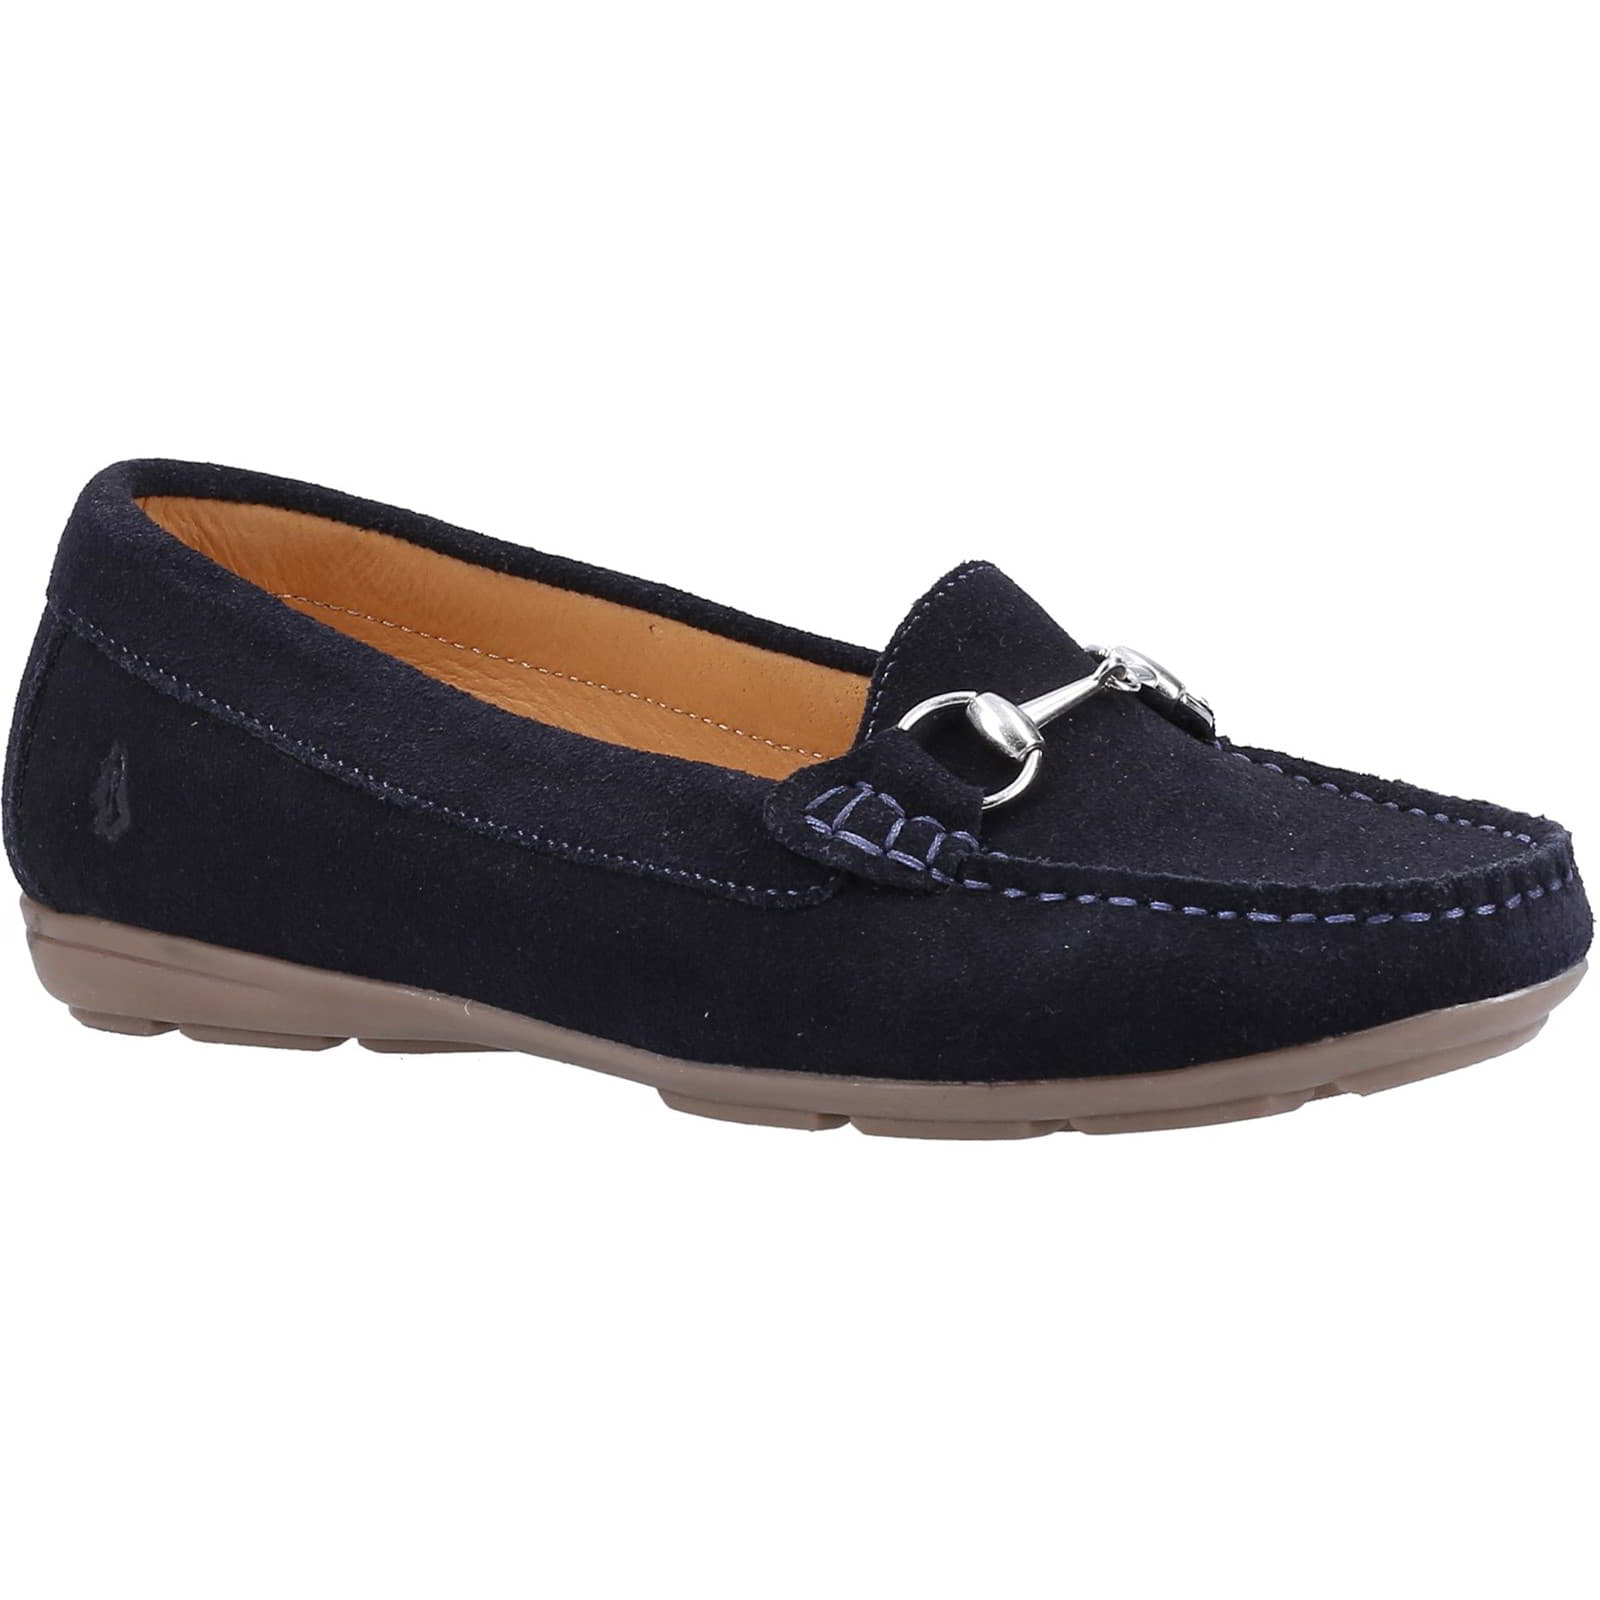 Hush Puppies Women's Molly Leather Slip On Loafers Shoes - UK 7